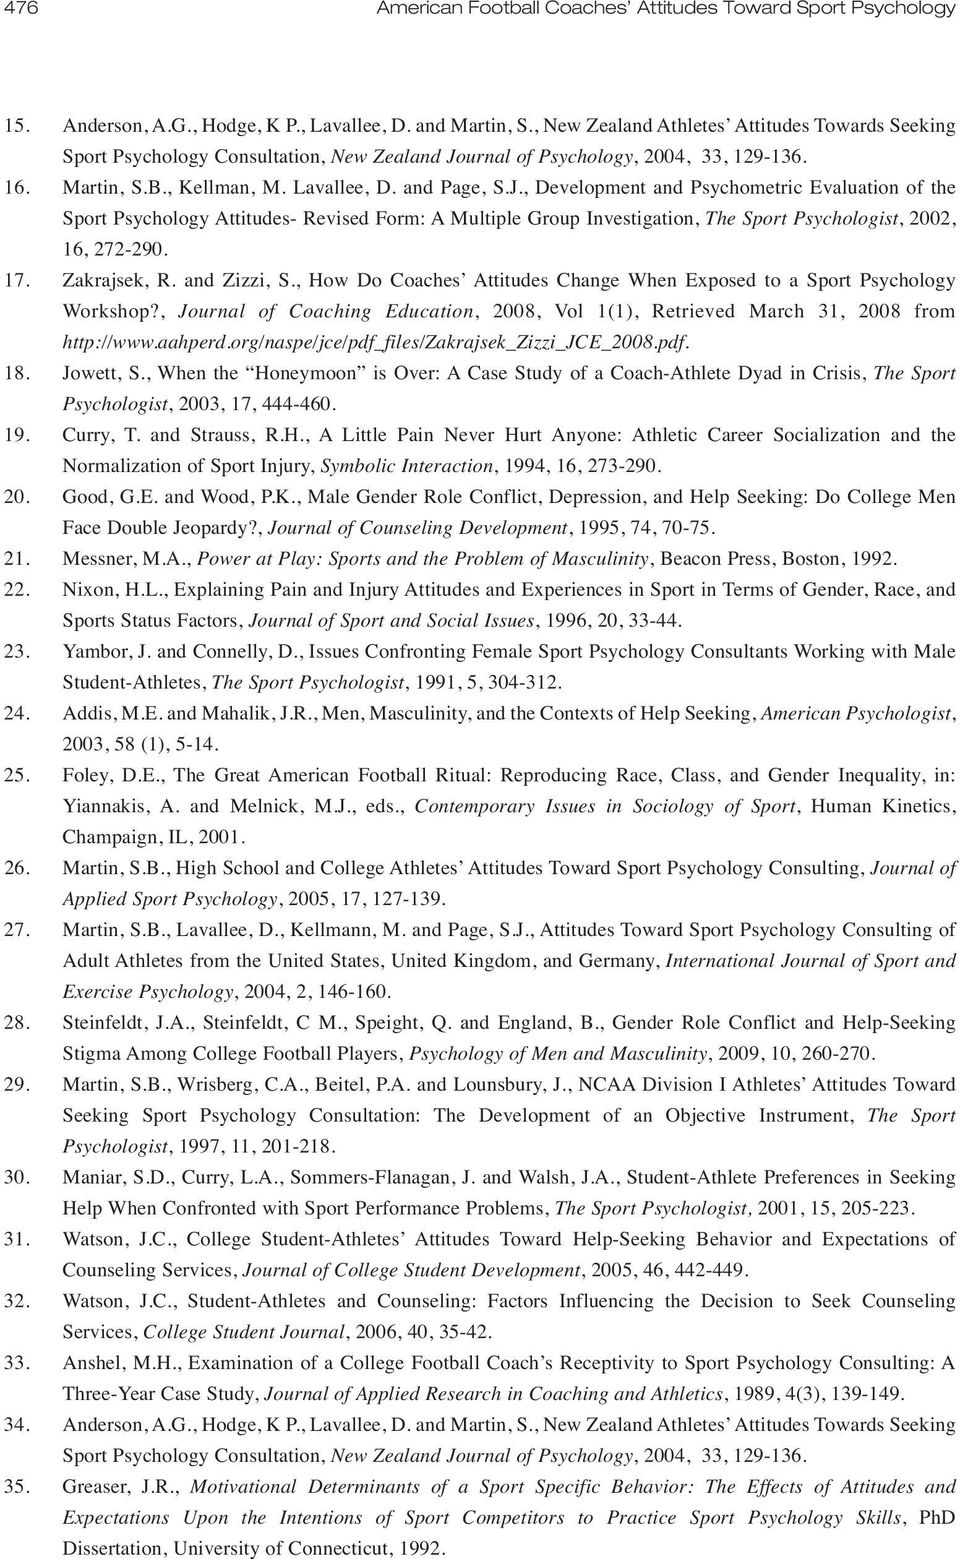 urnal of Psychology, 2004, 33, 129-136. 16. Martin, S.B., Kellman, M. Lavallee, D. and Page, S.J.